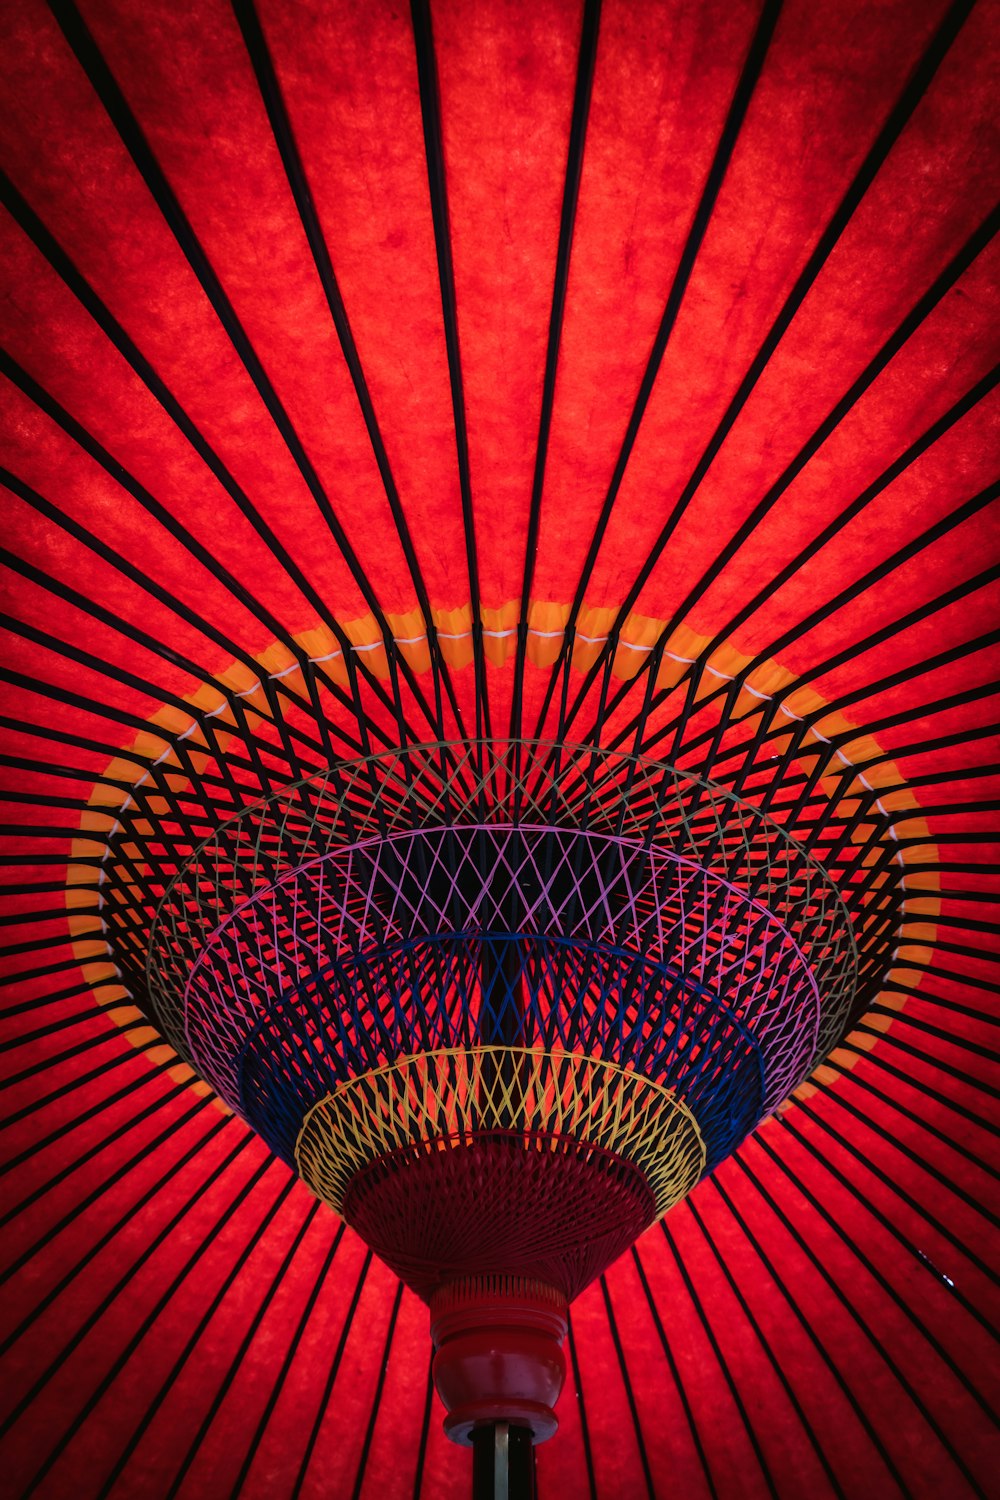 a close up of a red and yellow umbrella